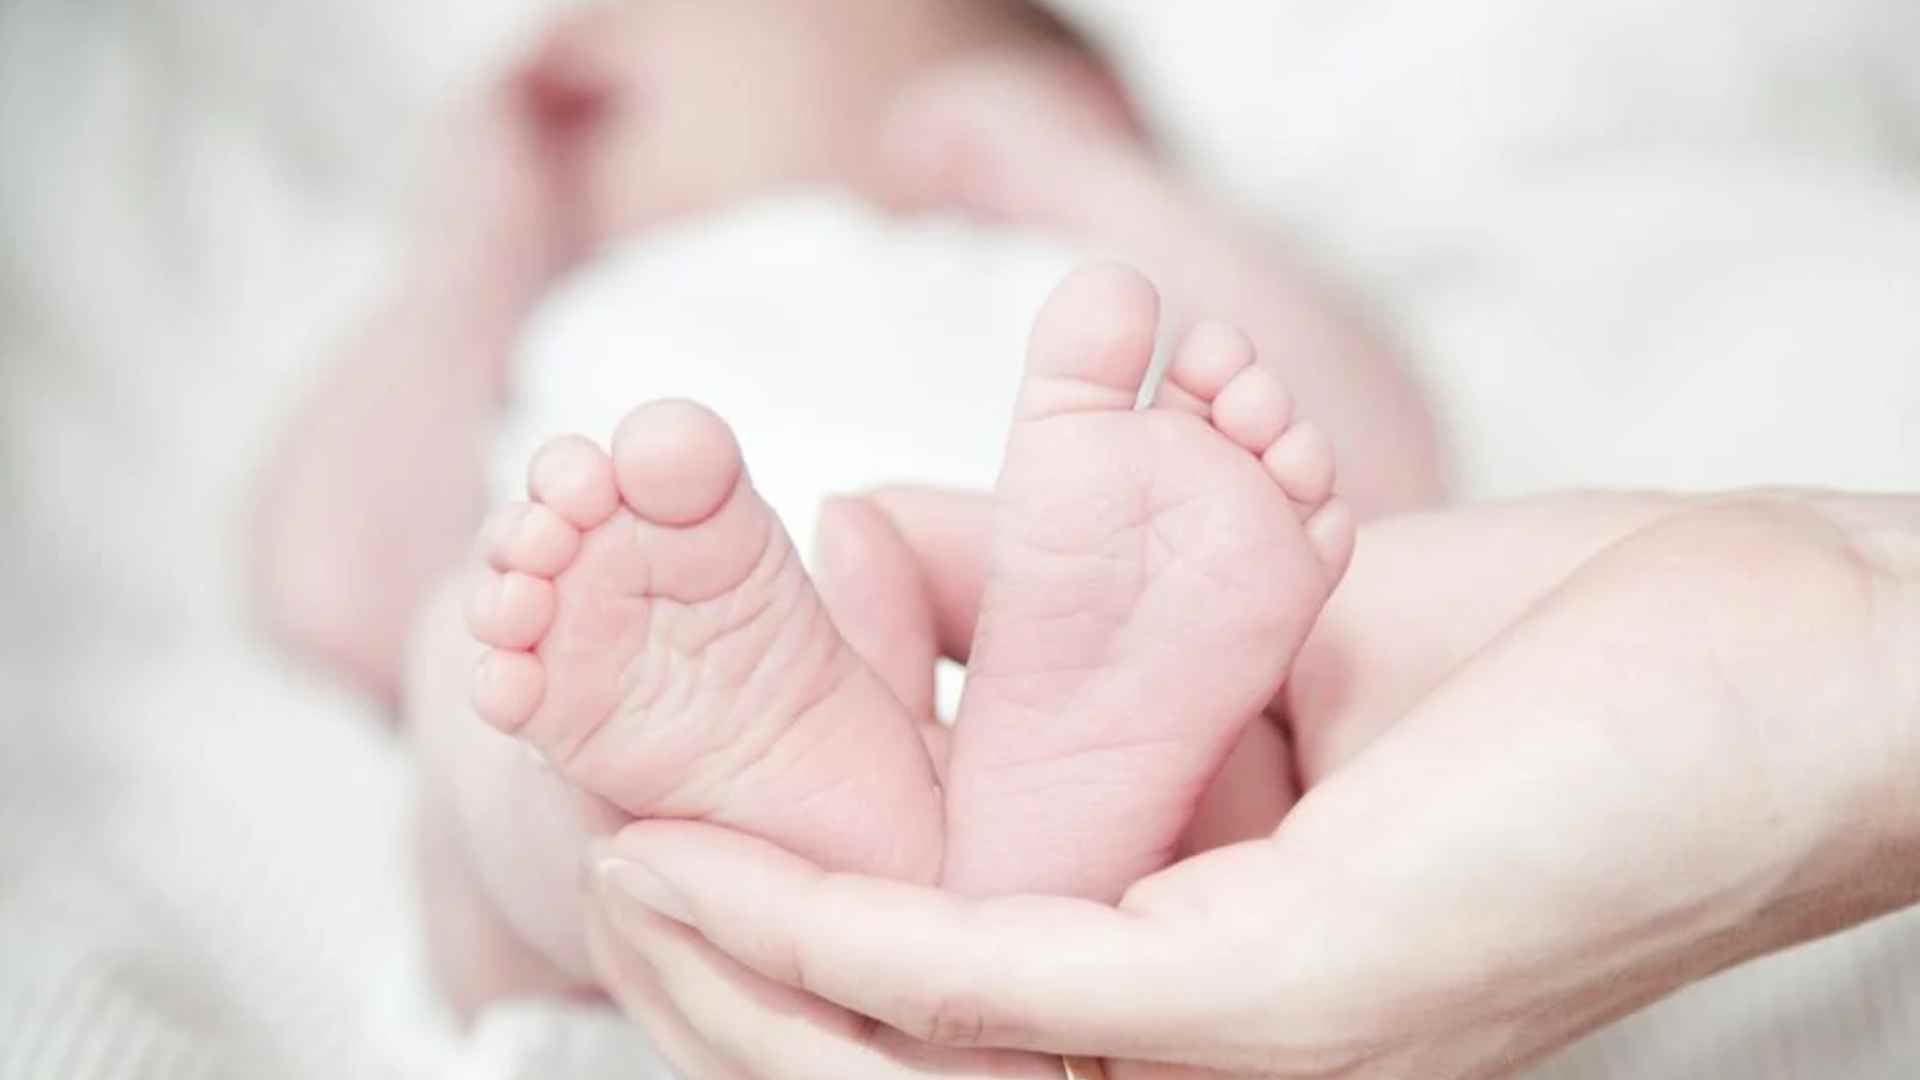 Preterm birth risk to increase by 60 per cent from exposure to extreme temperatures: Study